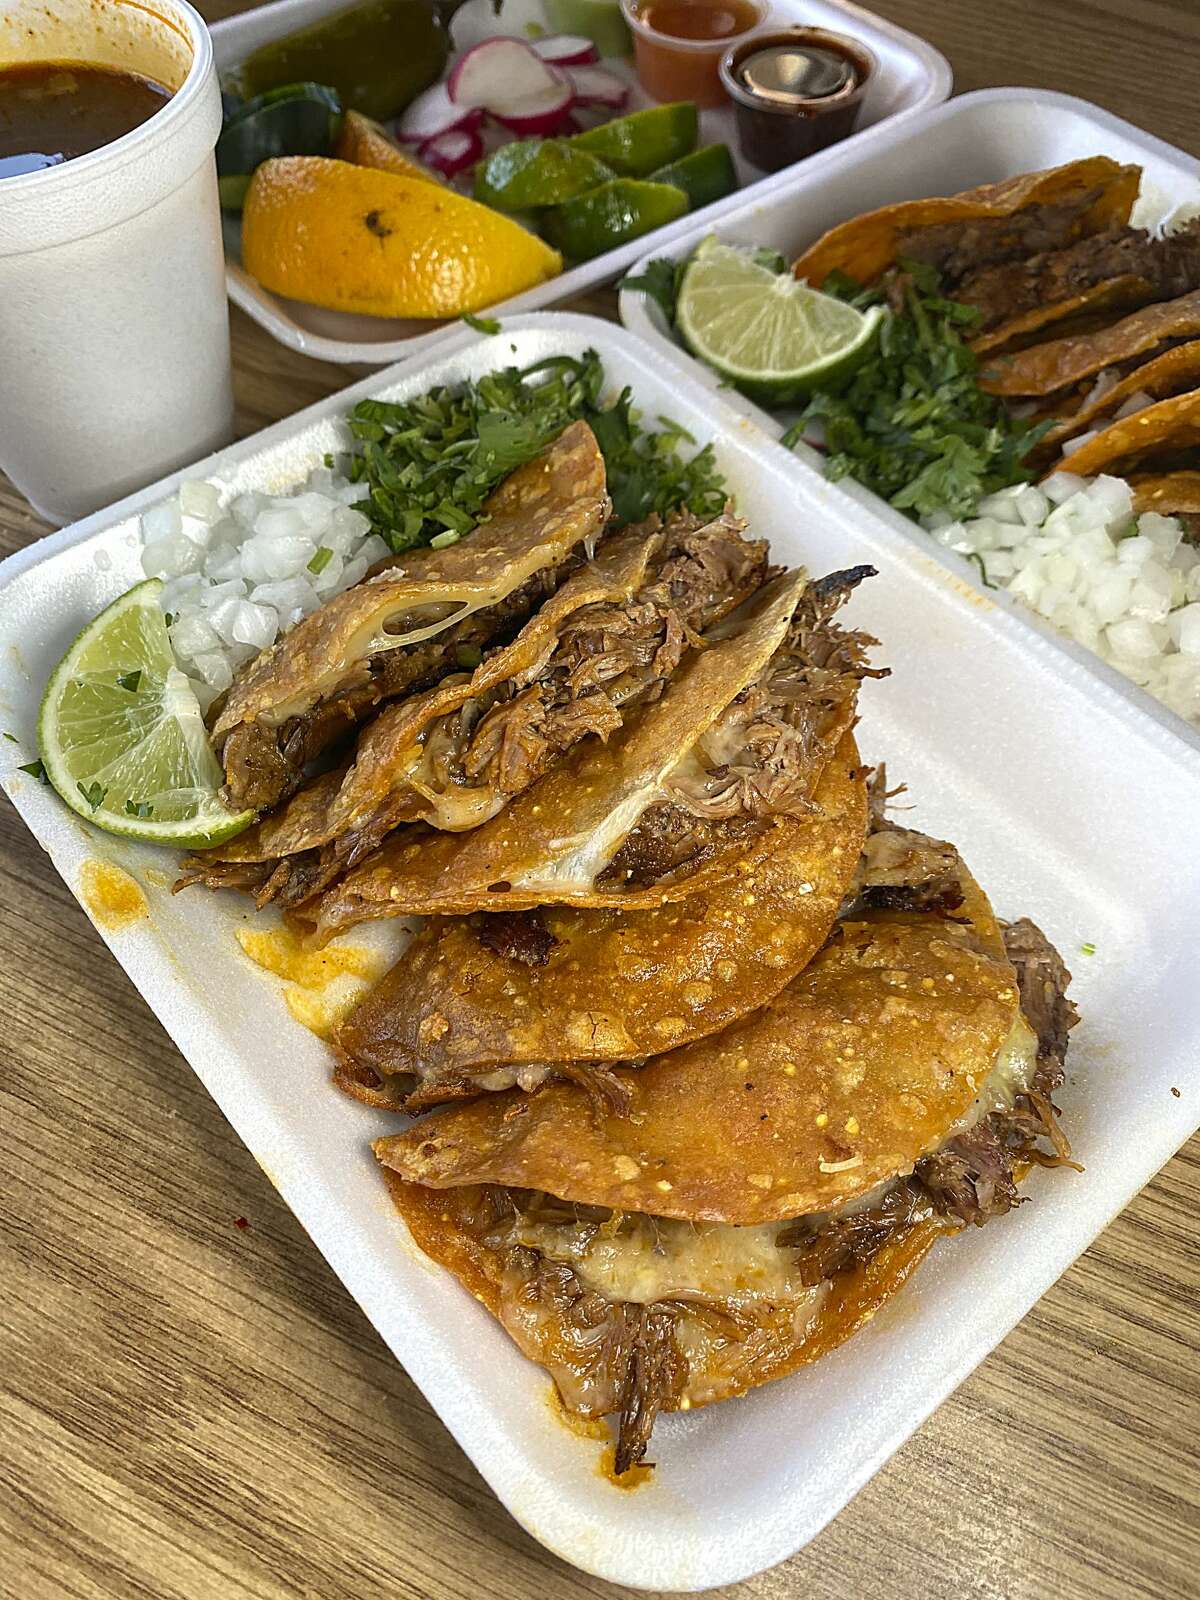 Here's where you can get birria tacos in San Antonio